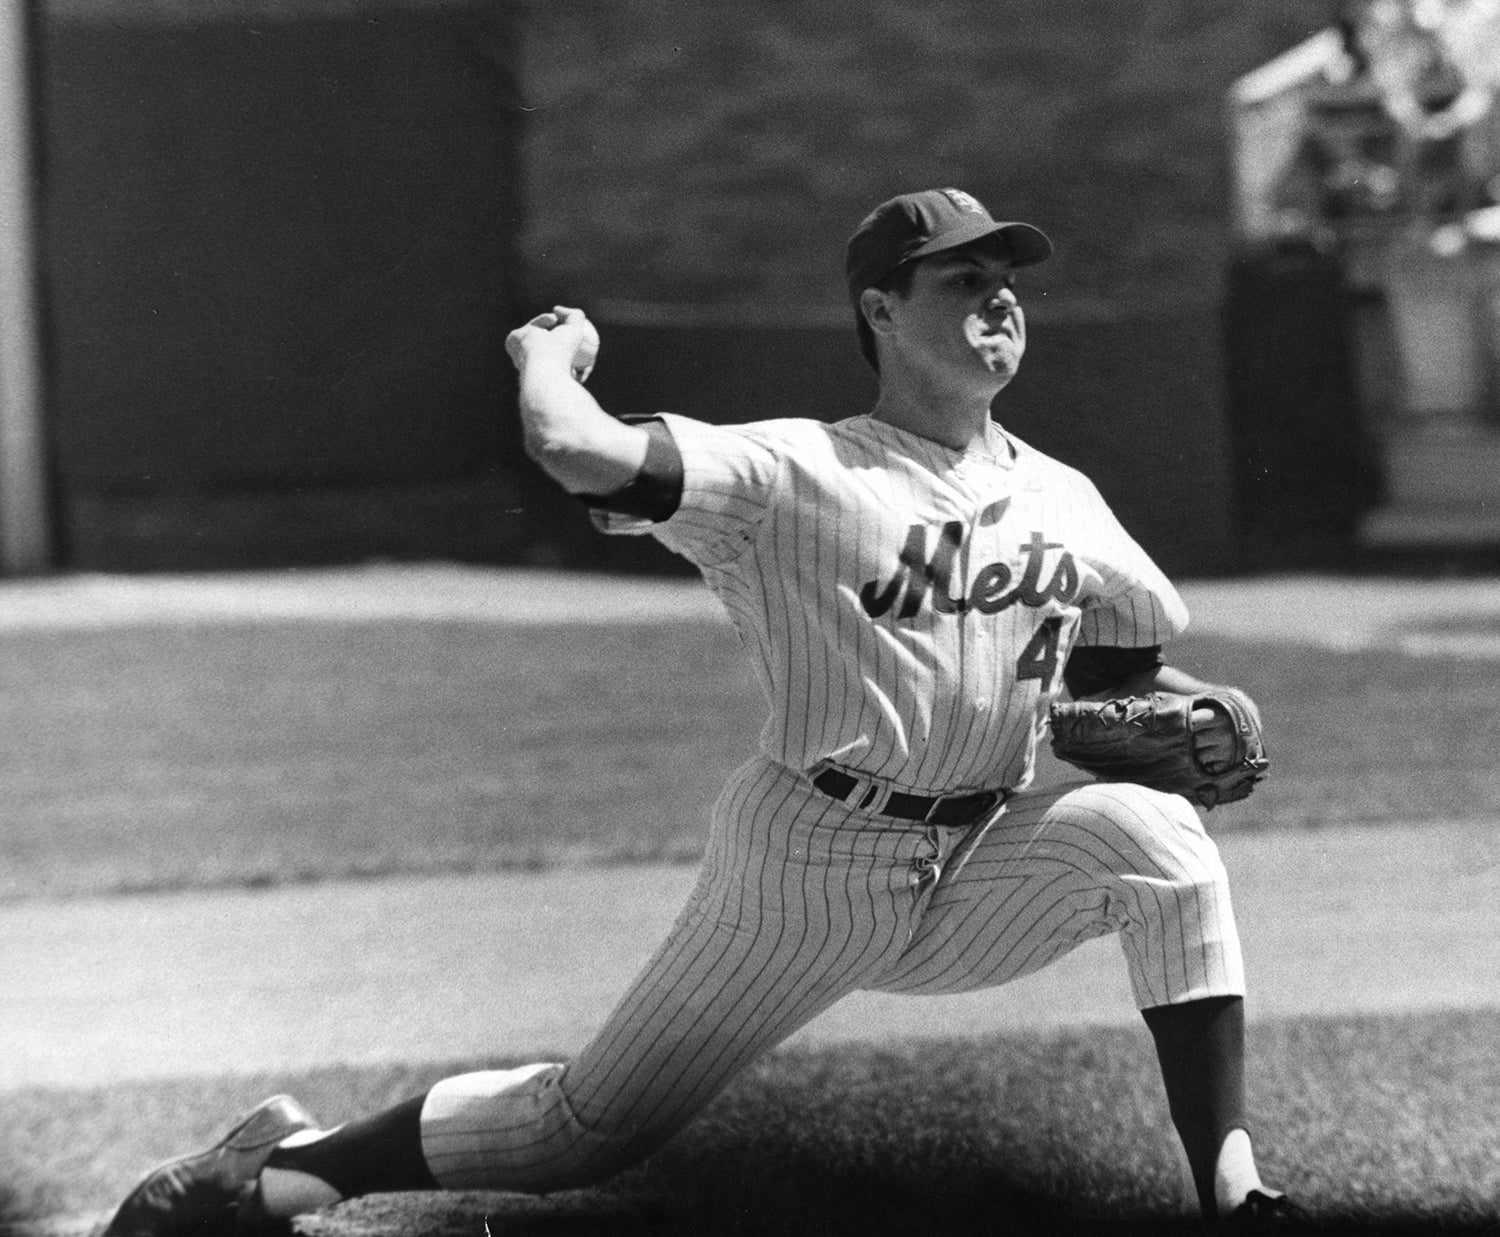 Seaver signs richest one-year deal for pitchers in MLB history